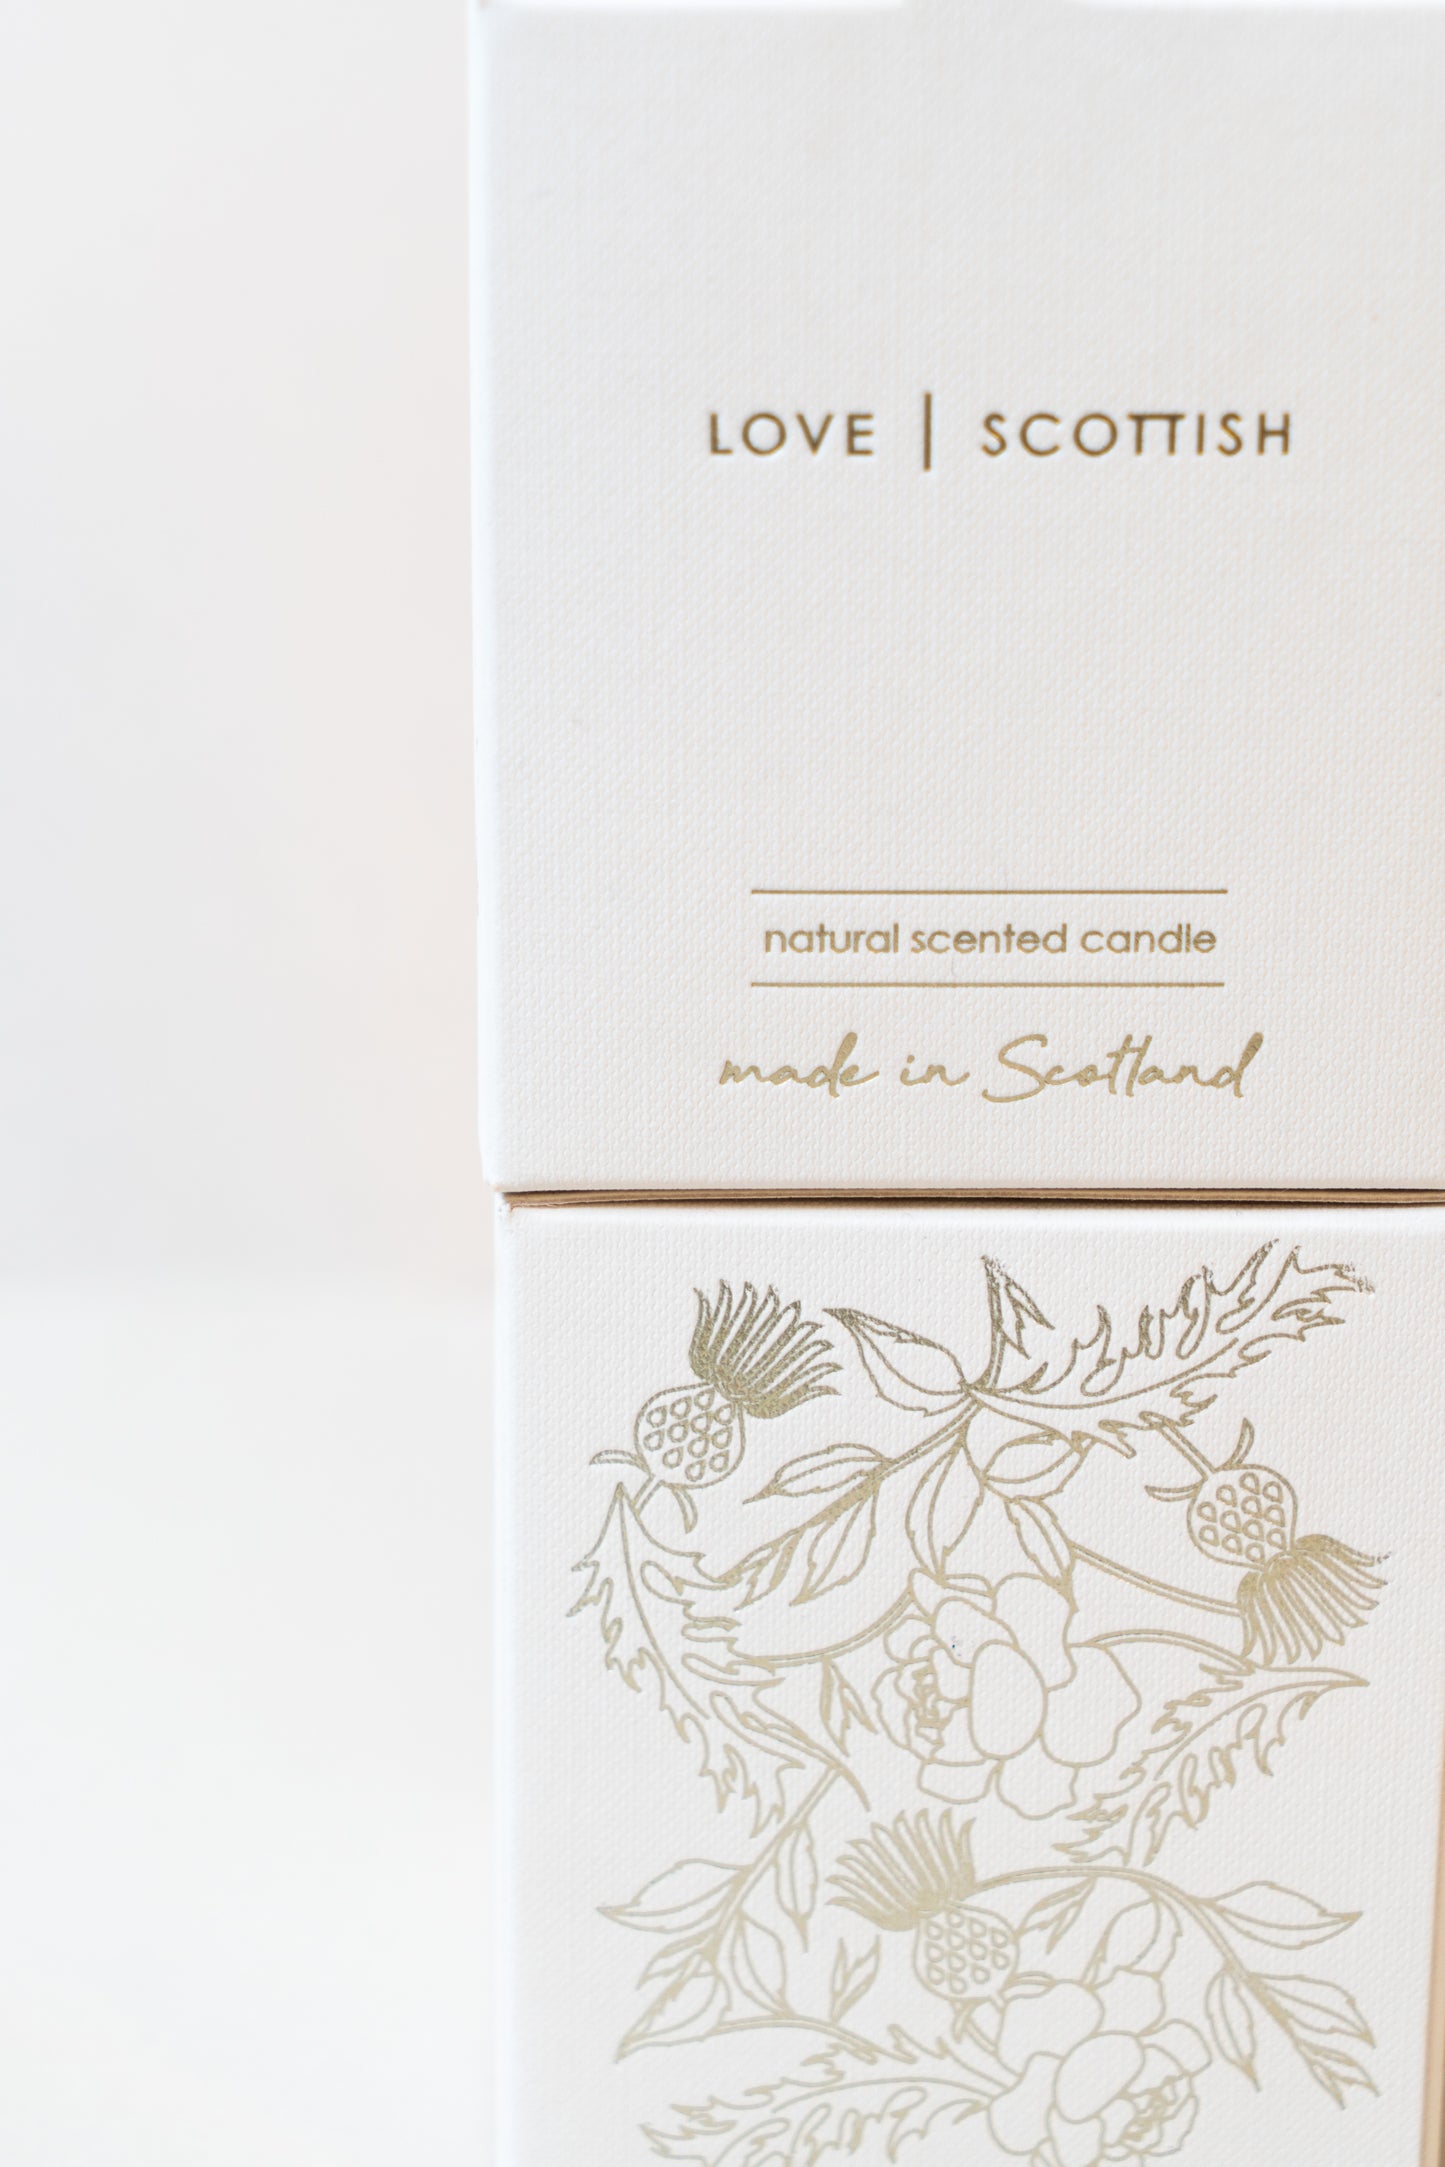 Love Scottish Candle Box on a White Background